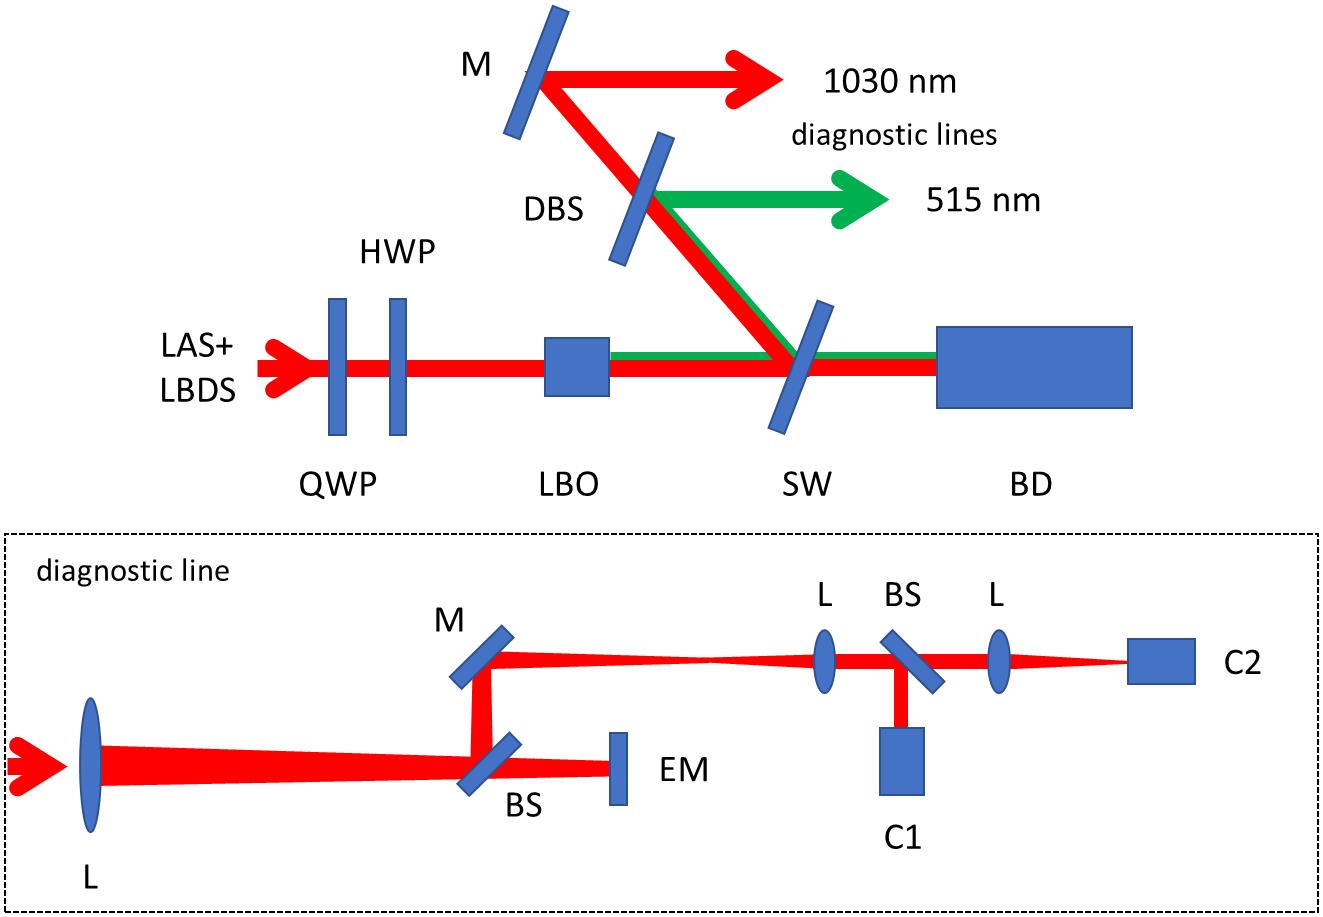 Schematic layout of the conversion experiment. It consists of a laser system and laser beam distribution system (LAS+LBDS), quarter waveplate (QWP), half waveplate (HWP), conversion crystal (LBO), partially reflecting sampling wedge (SW) and beam dump (BD). The diagnostics consist of a dichroic beamsplitter (DBS), mirrors (M), lenses (L), beamsplitters (BS), an energy meter (EM), a near-field camera (C1) and a far field camera (C2). The layout of diagnostic lines is the same for both wavelengths and is shown only once.